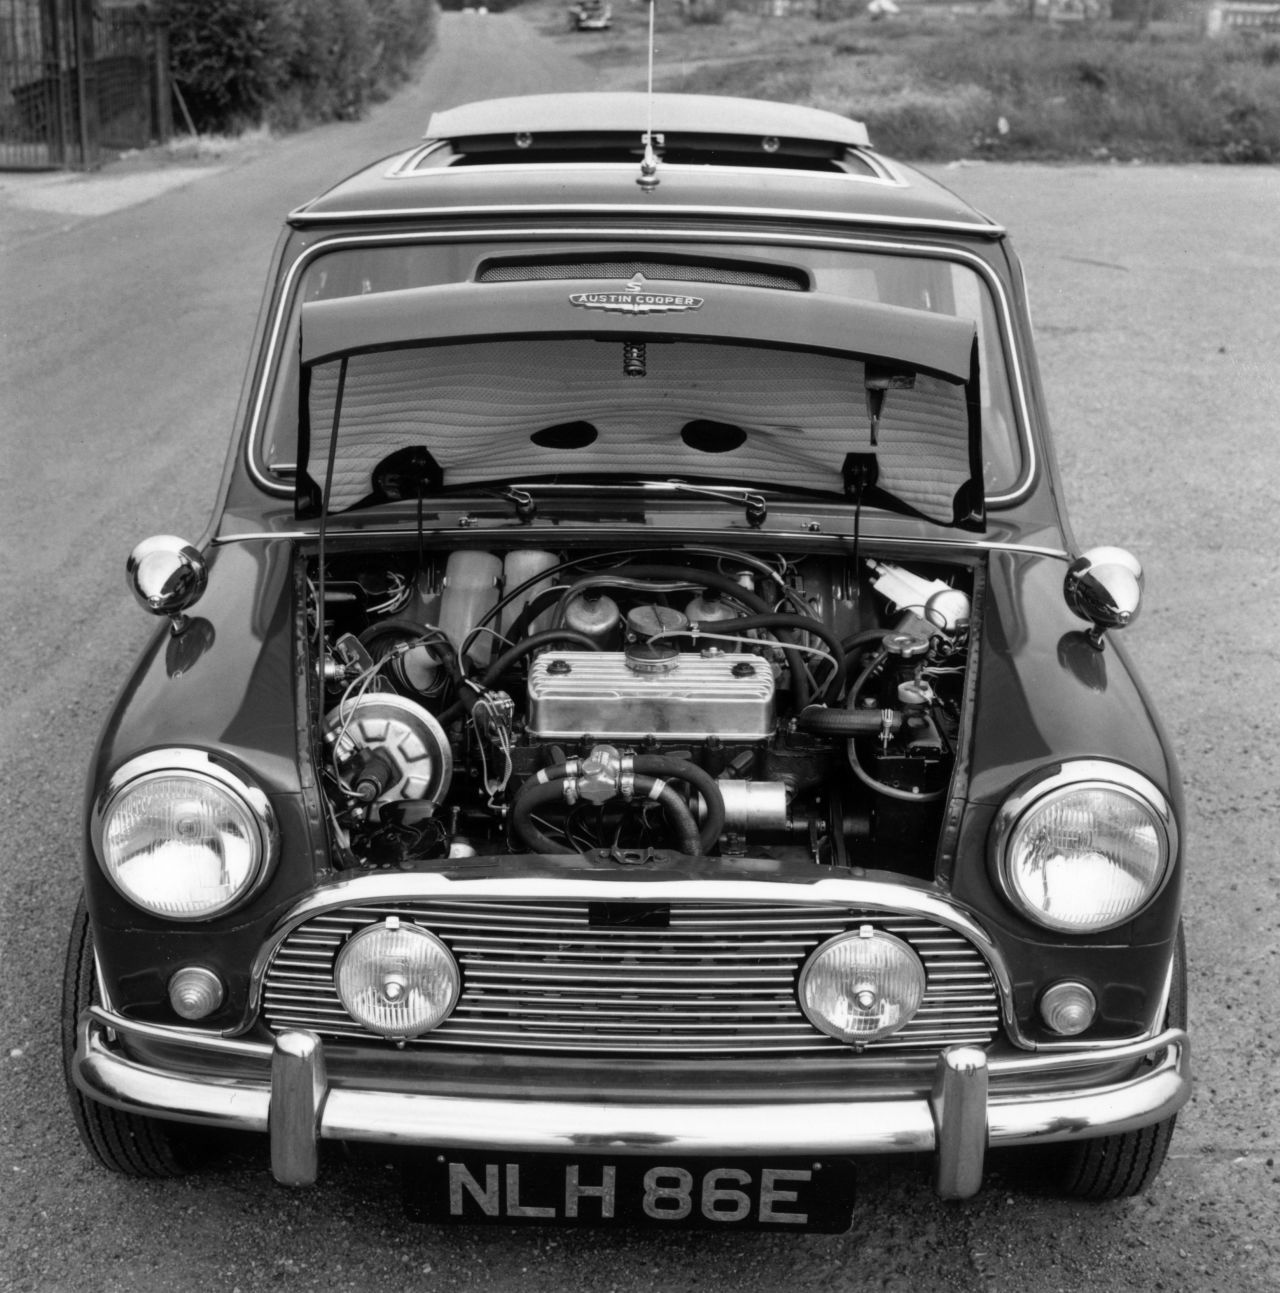 This Austin Mini Cooper S was pictured in 1967 with its bonnet raised to show the engine. The classic car, made famous by the Michael Caine film "The Italian Job," will be relaunched in 2019 as a fully electric vehicle. 